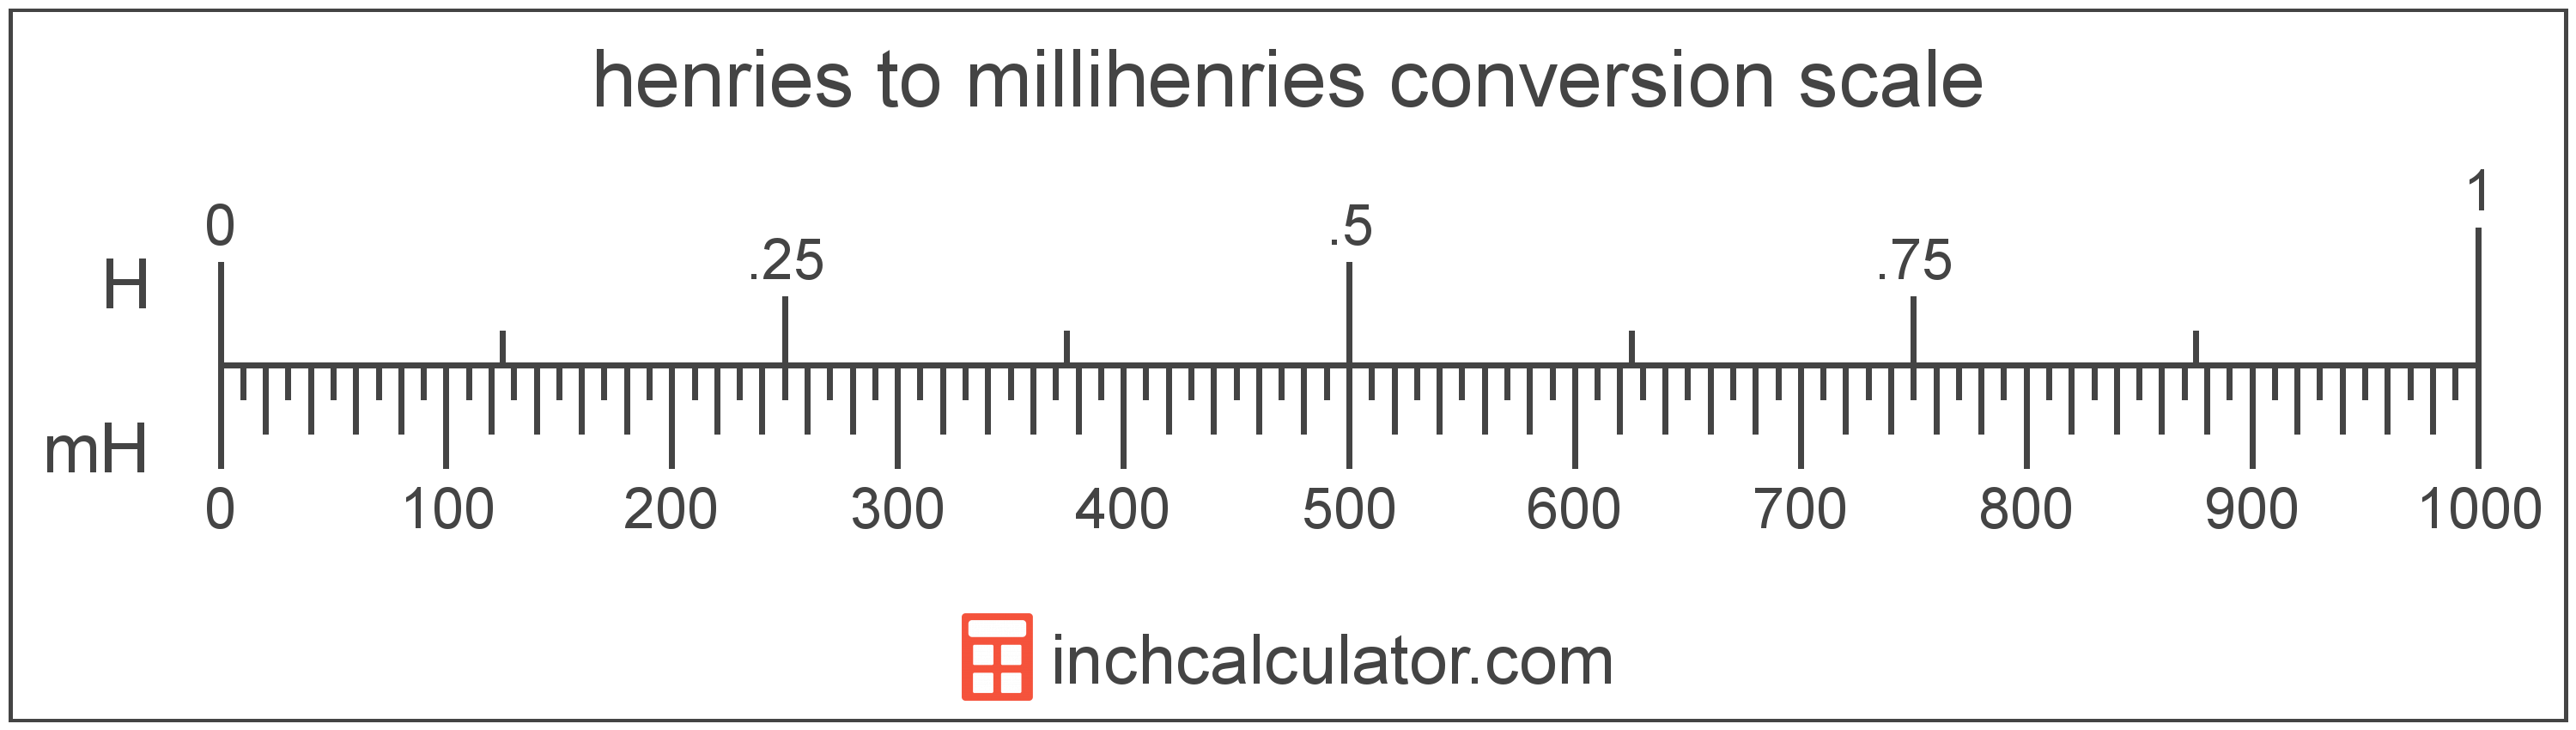 conversion scale showing millihenries and equivalent henries electrical inductance values